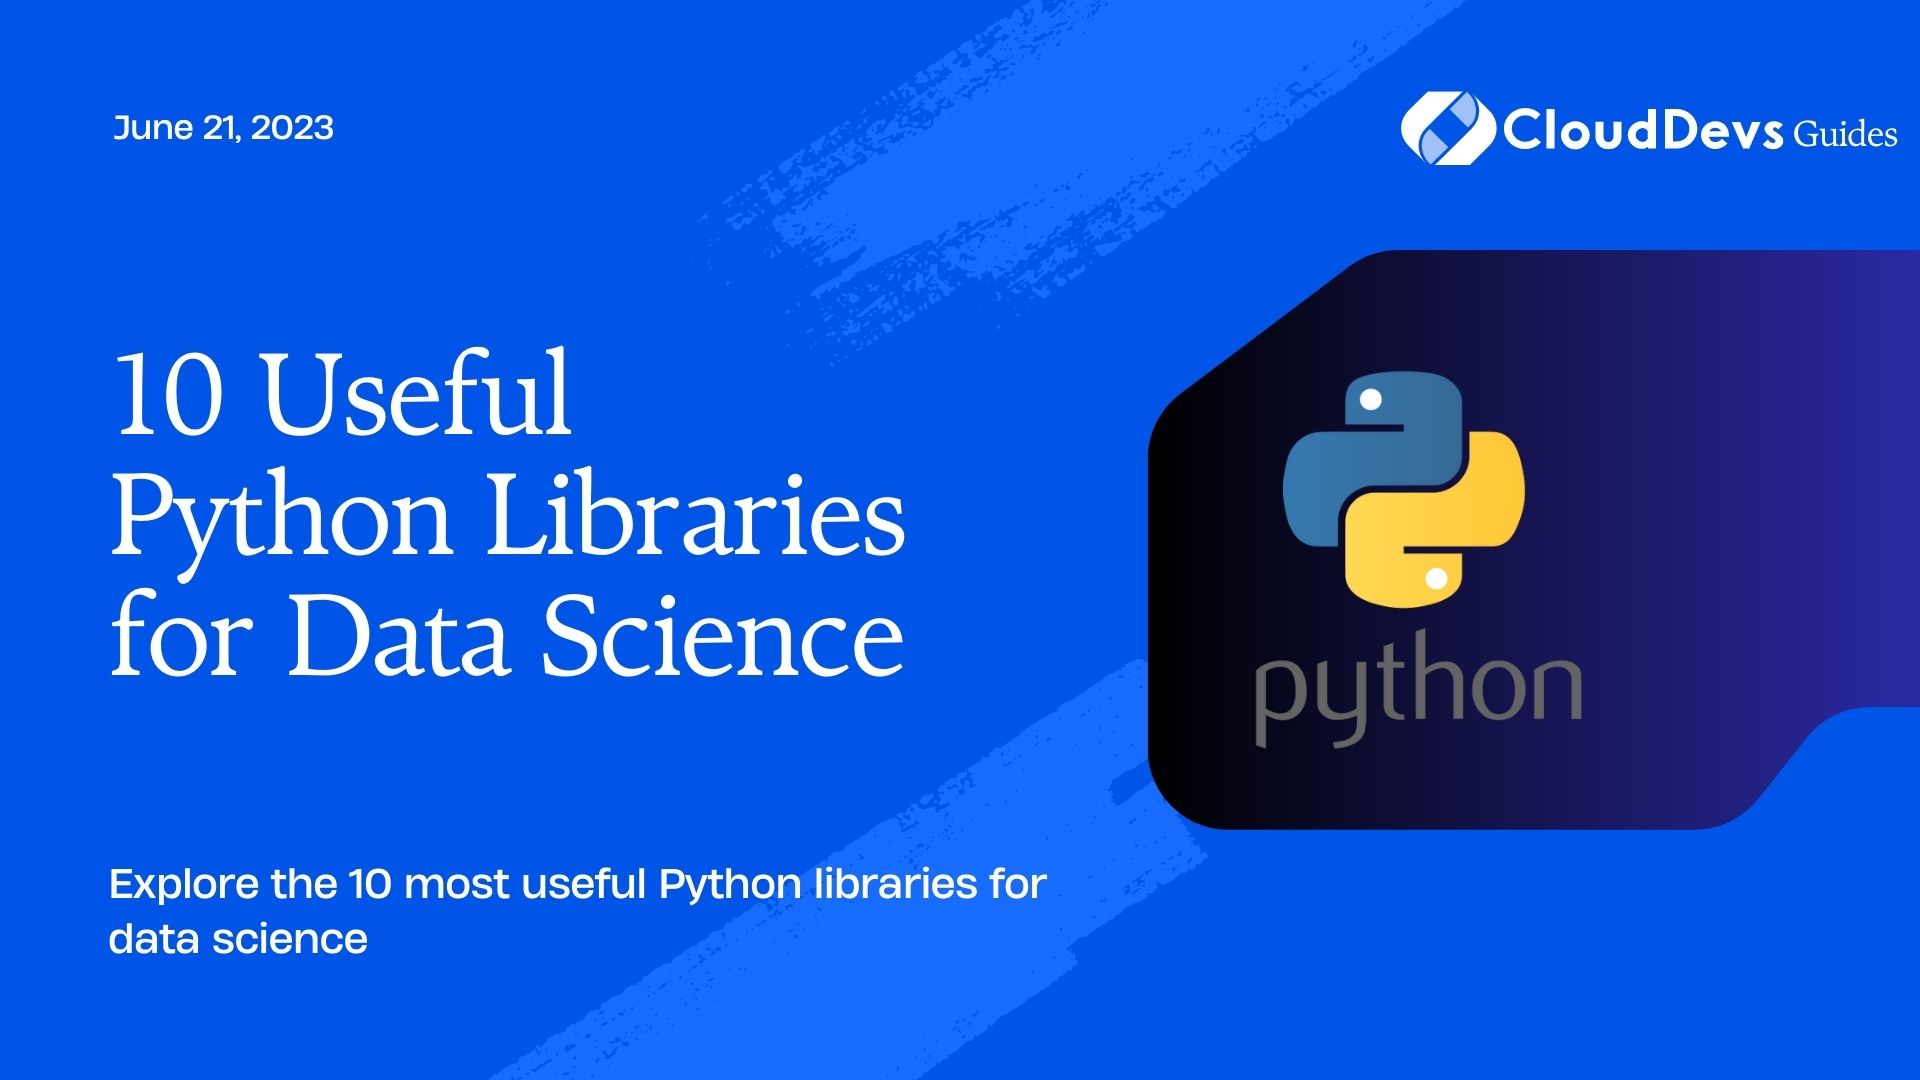 10 Useful Python Libraries for Data Science